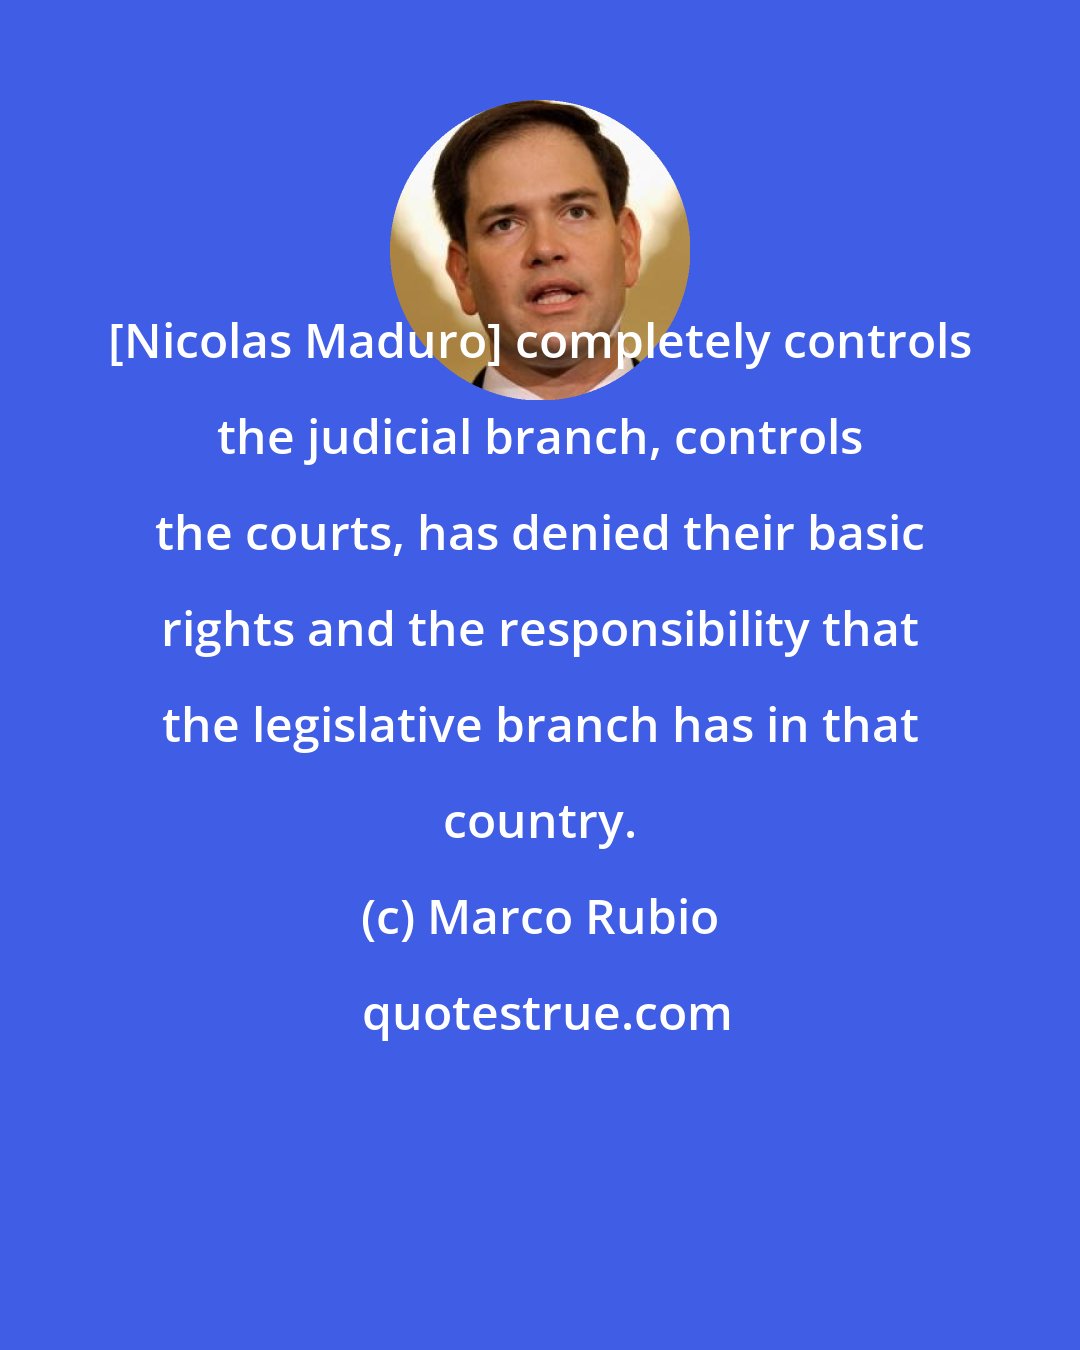 Marco Rubio: [Nicolas Maduro] completely controls the judicial branch, controls the courts, has denied their basic rights and the responsibility that the legislative branch has in that country.